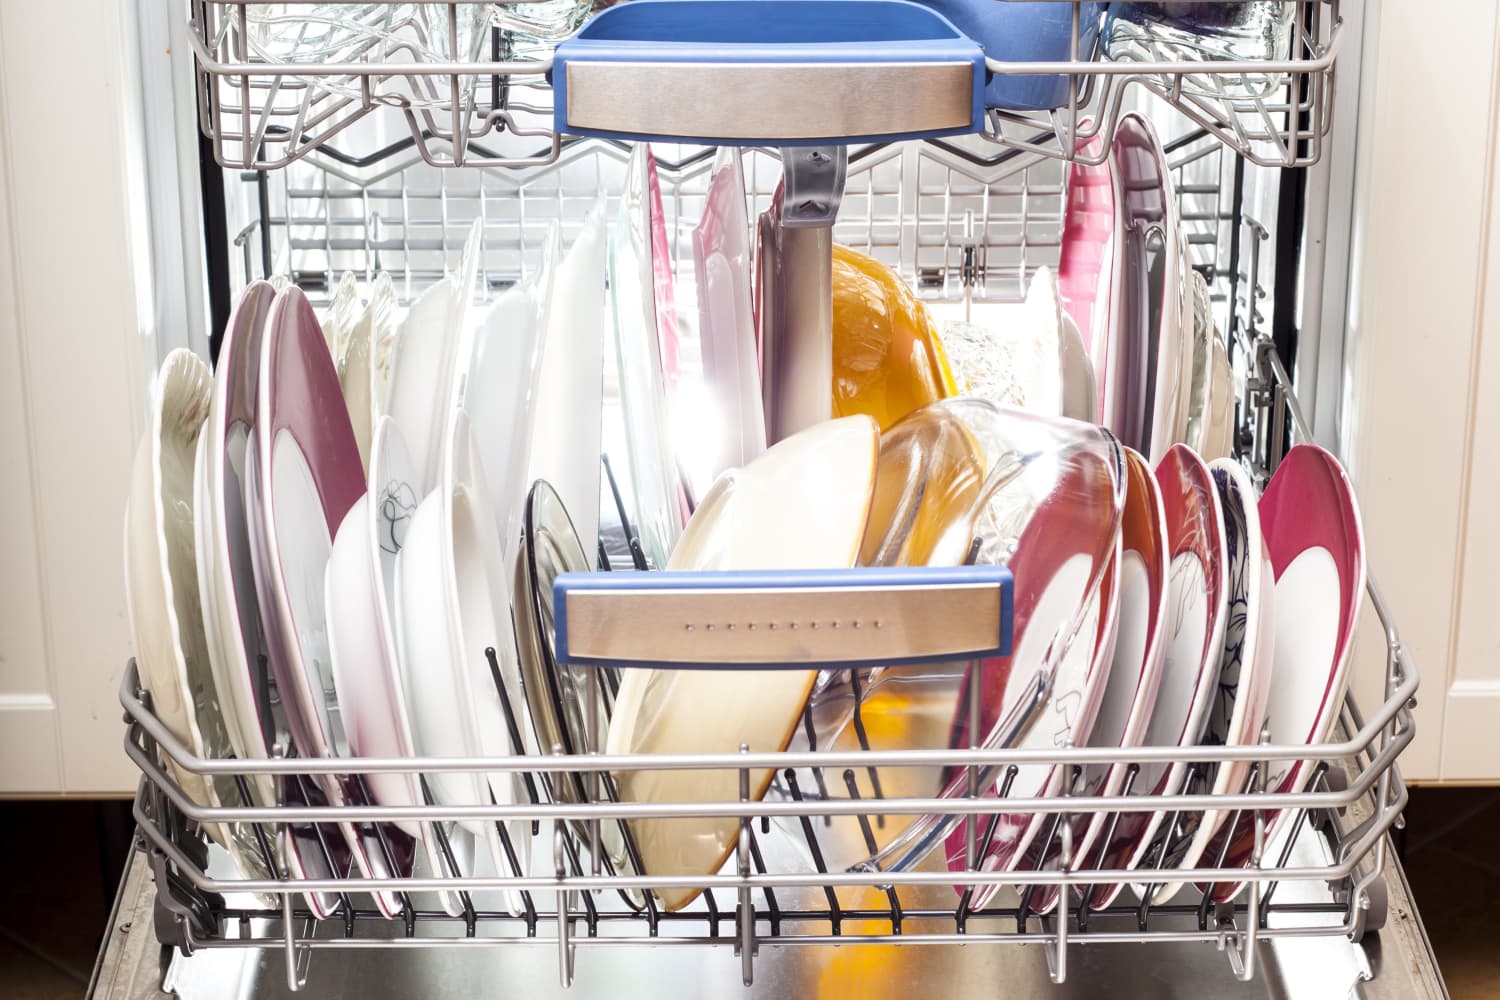 How to clean baking sheets in the dishwasher